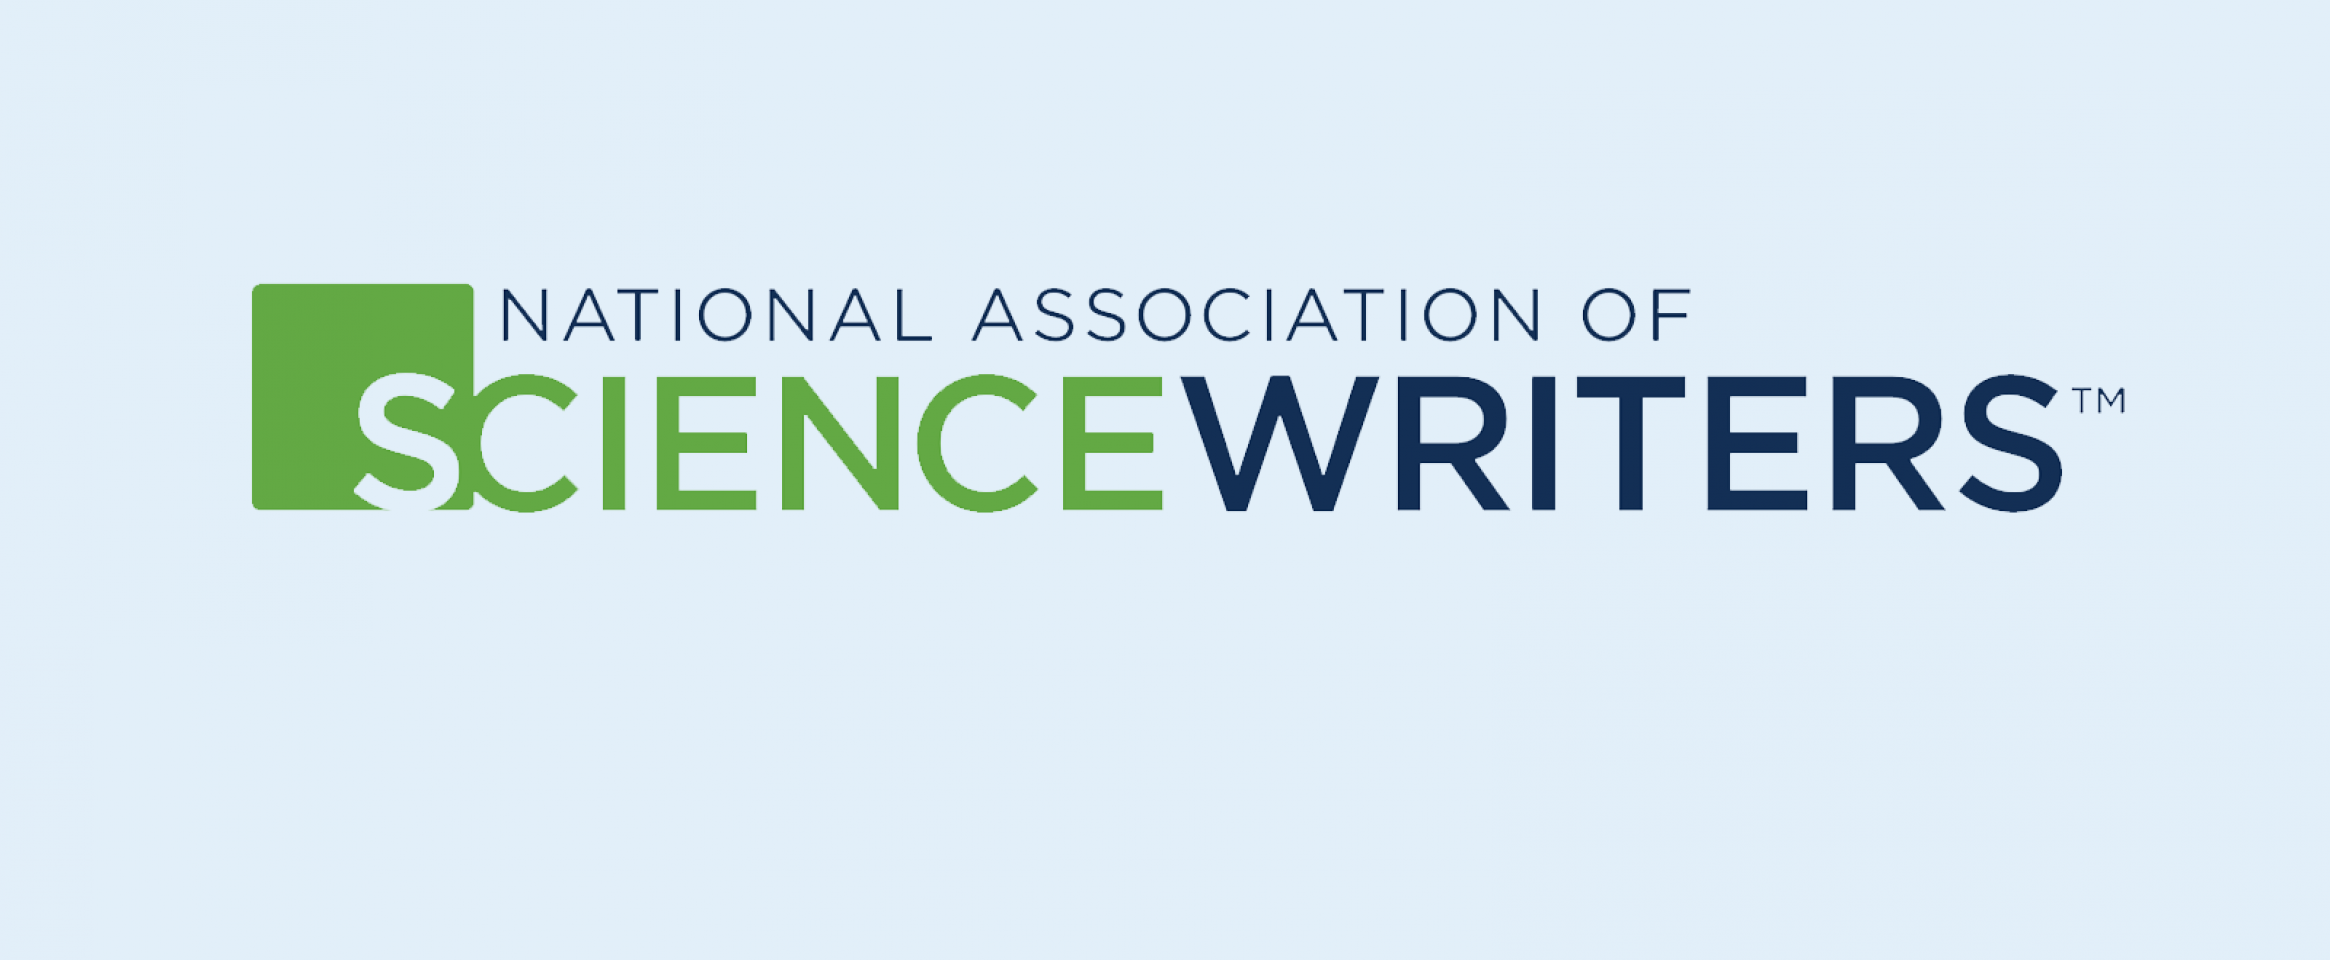 nasw-calls-for-data-access-and-transparency-sciencewriters-www-nasw